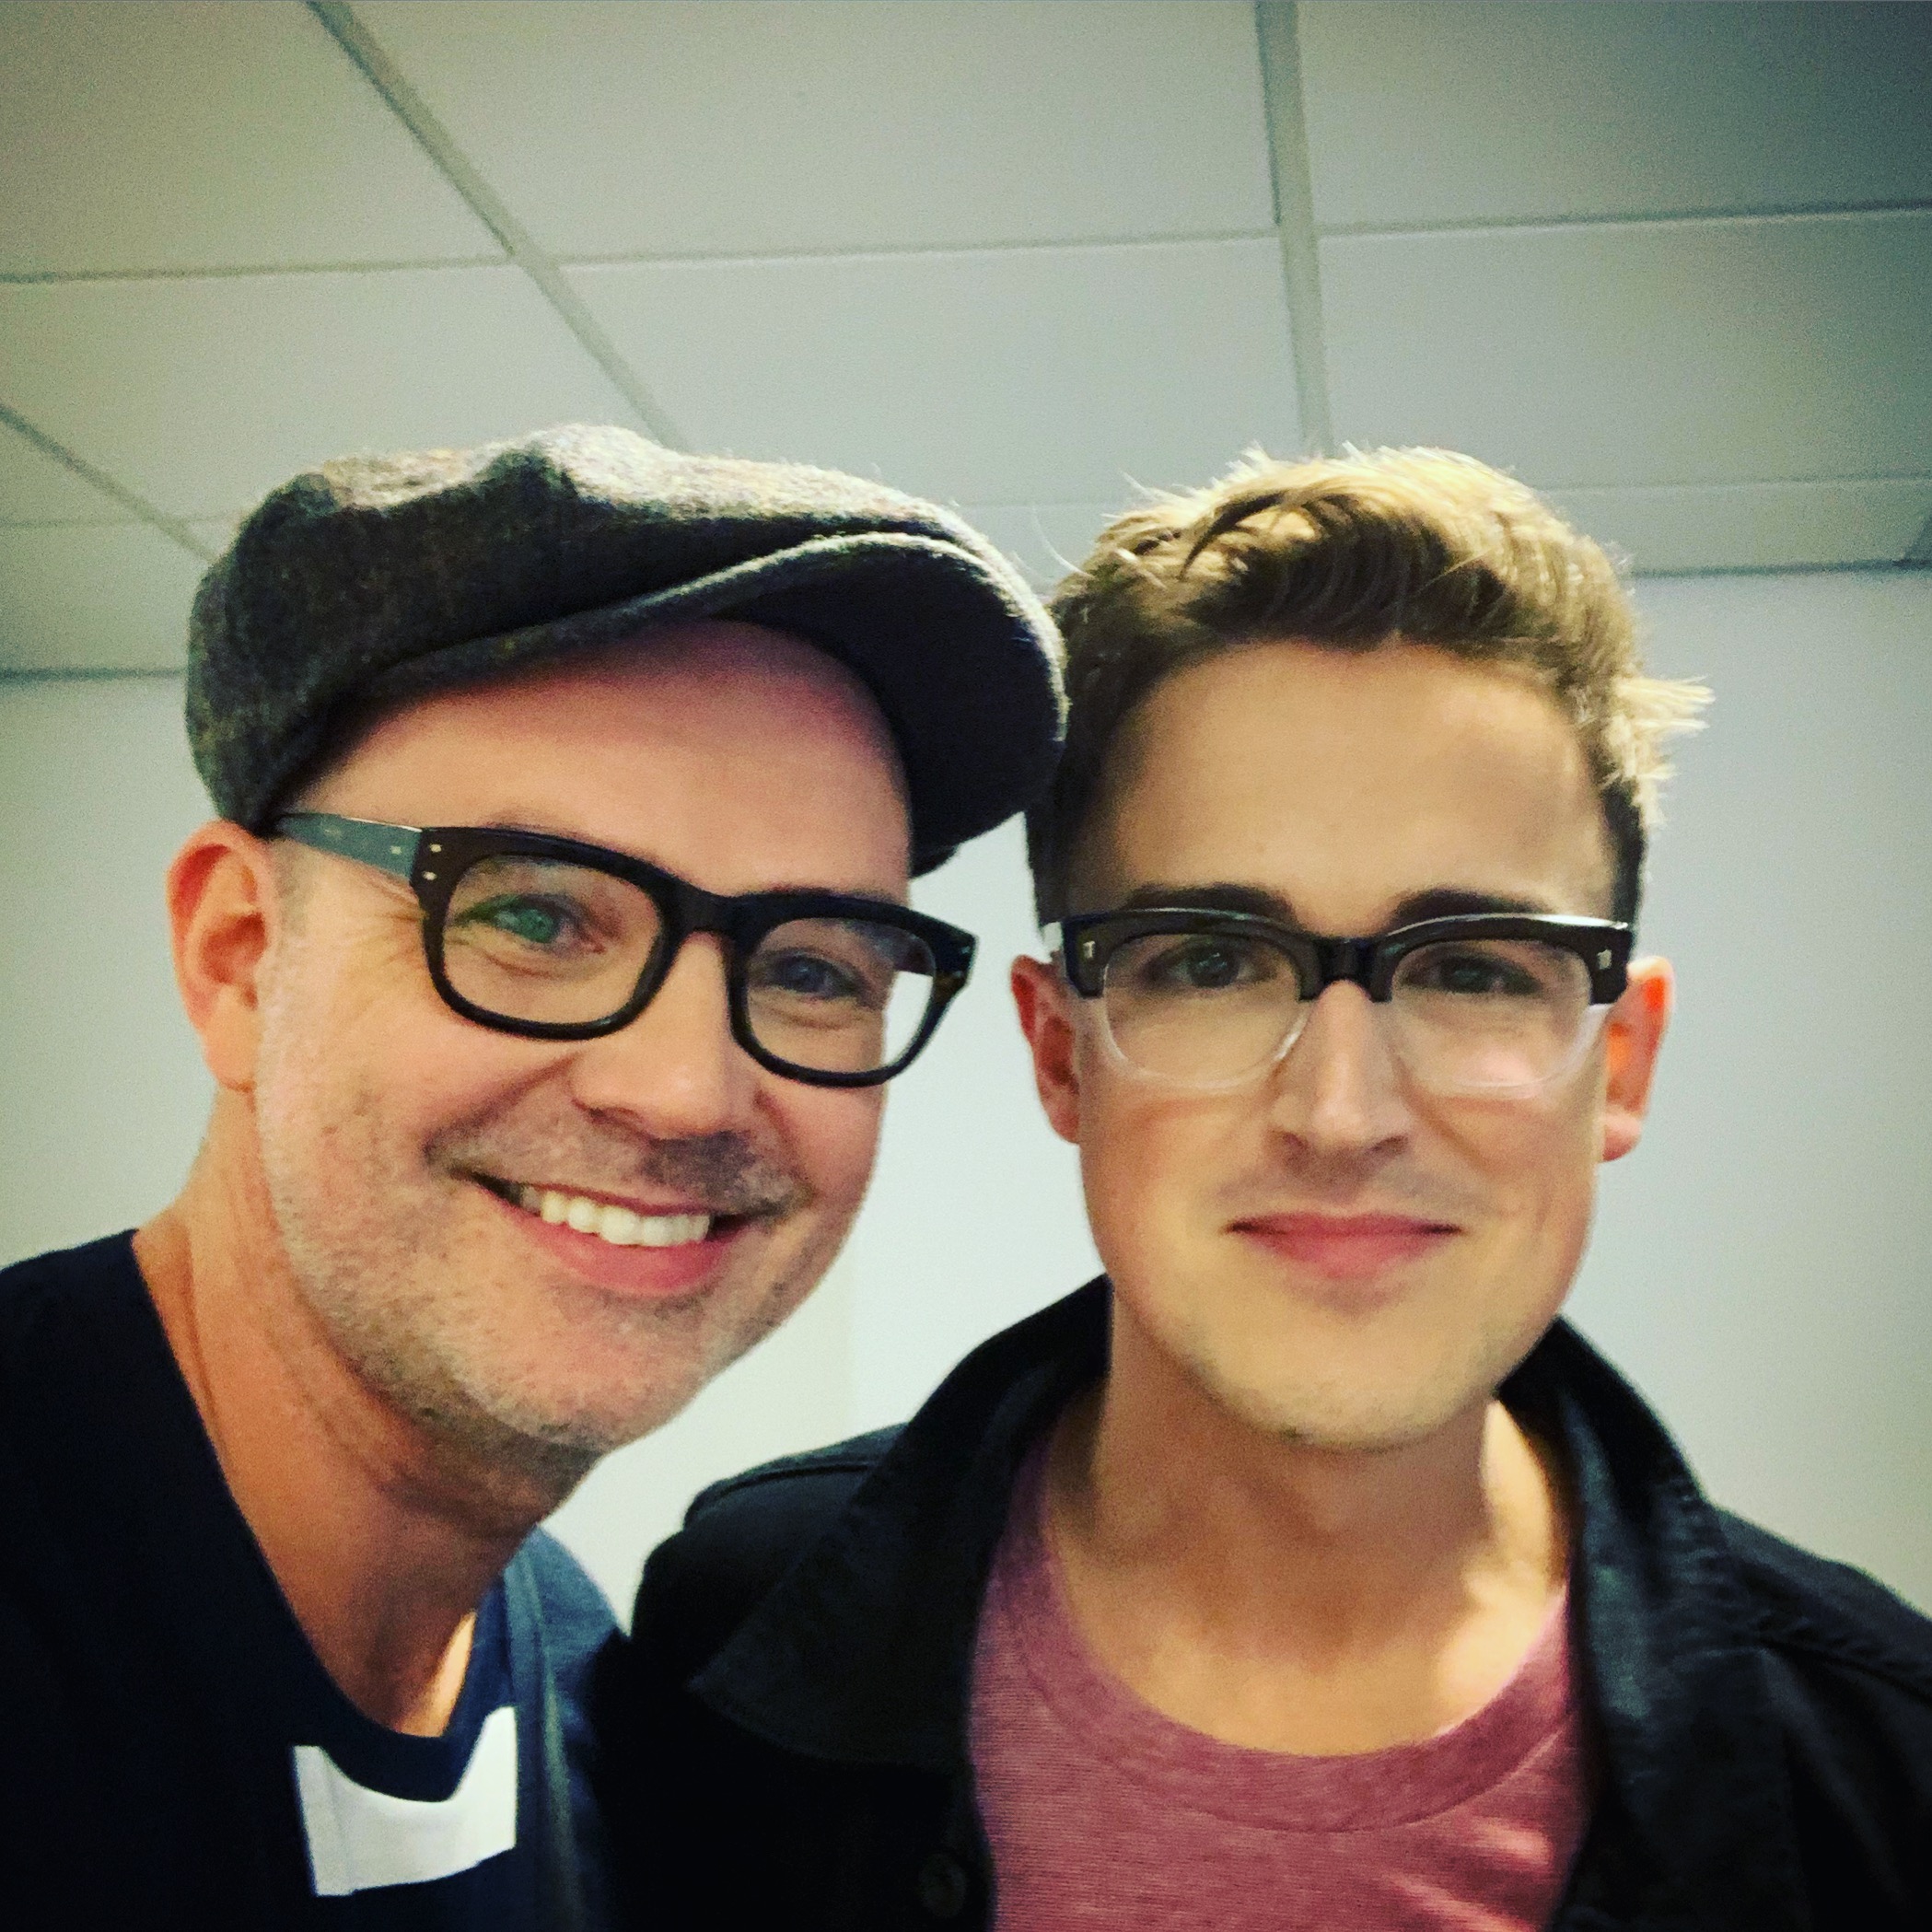 With Tom Fletcher at our World Book Day event